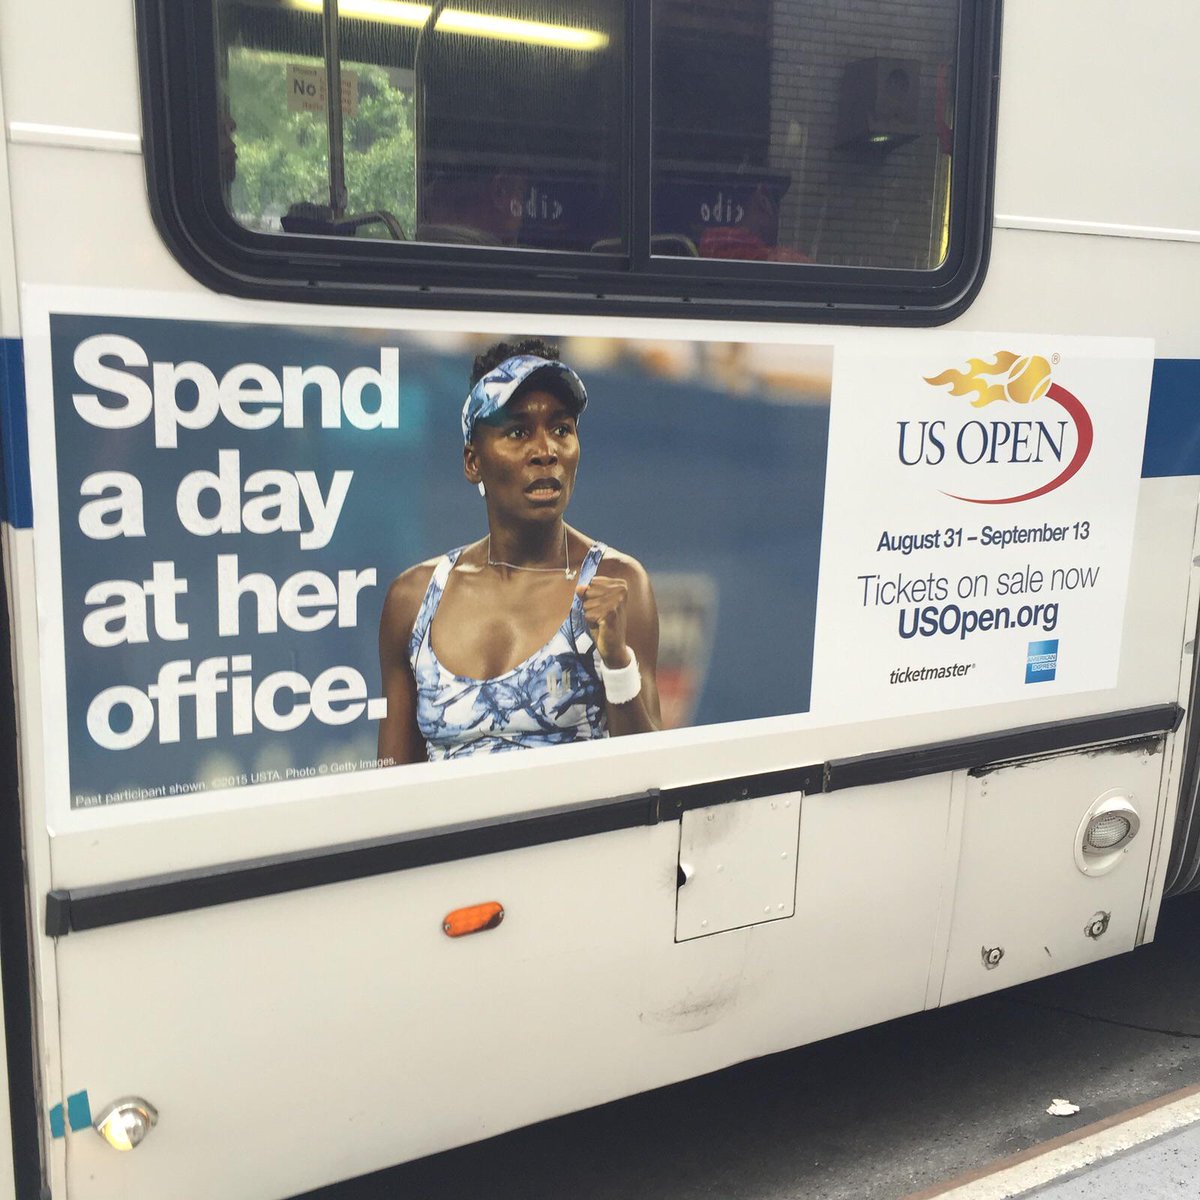 You know you've made it when you're on a NYC bus!
#USOpen #StepIntoMyOffice @EleVenbyVenus http://t.co/Wdh5uyALKl